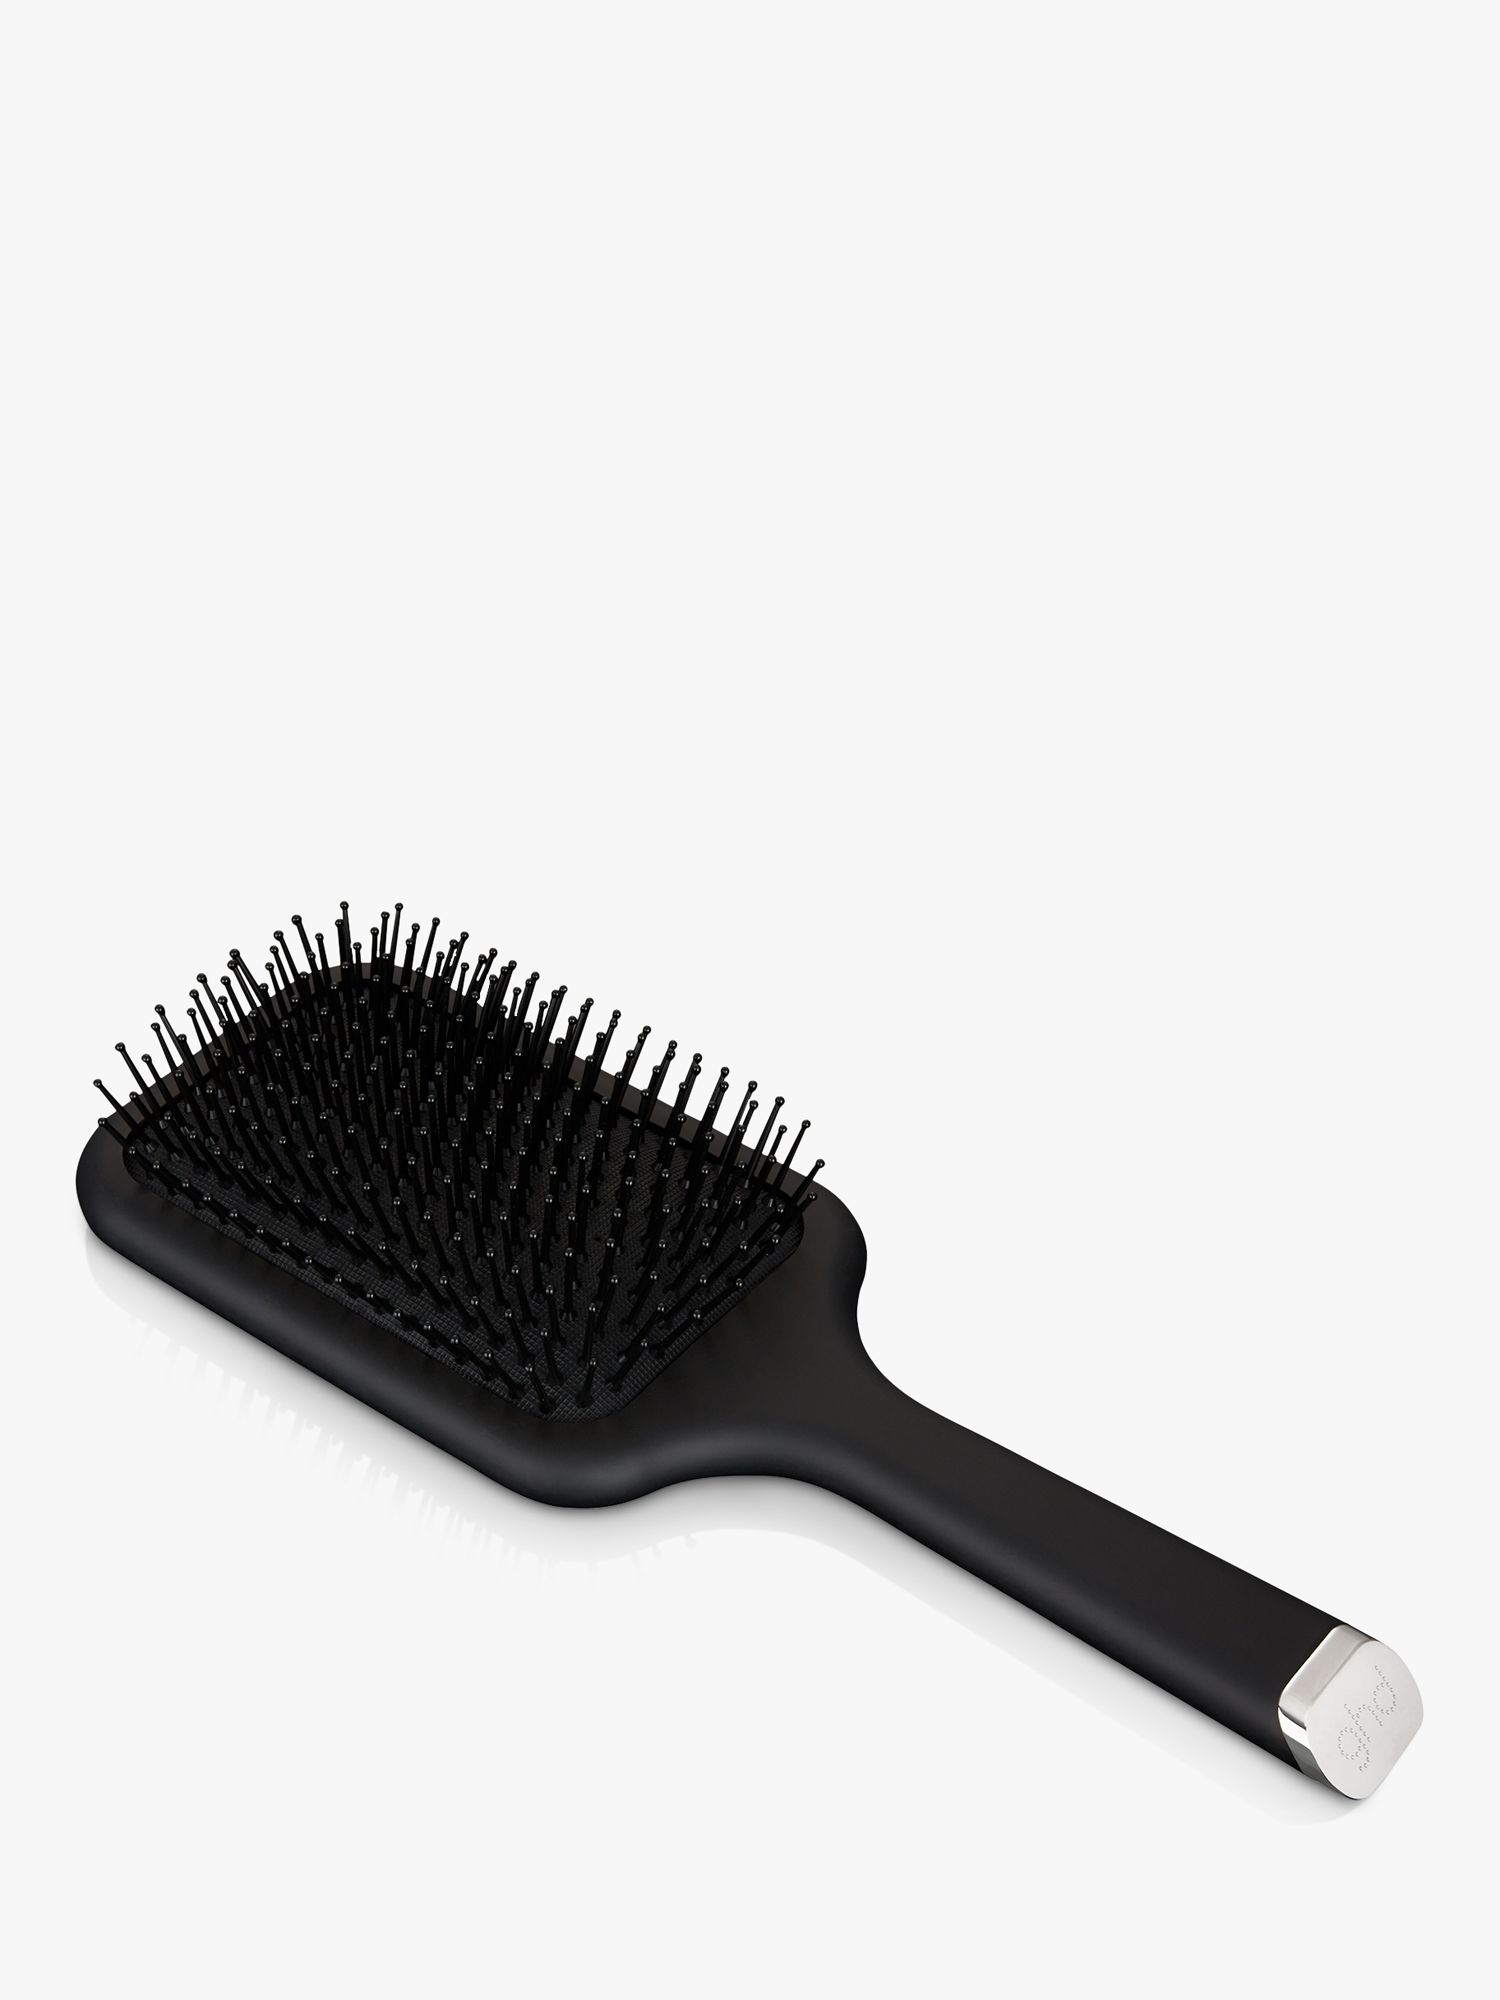 ghd All Rounder Paddle Brush 1